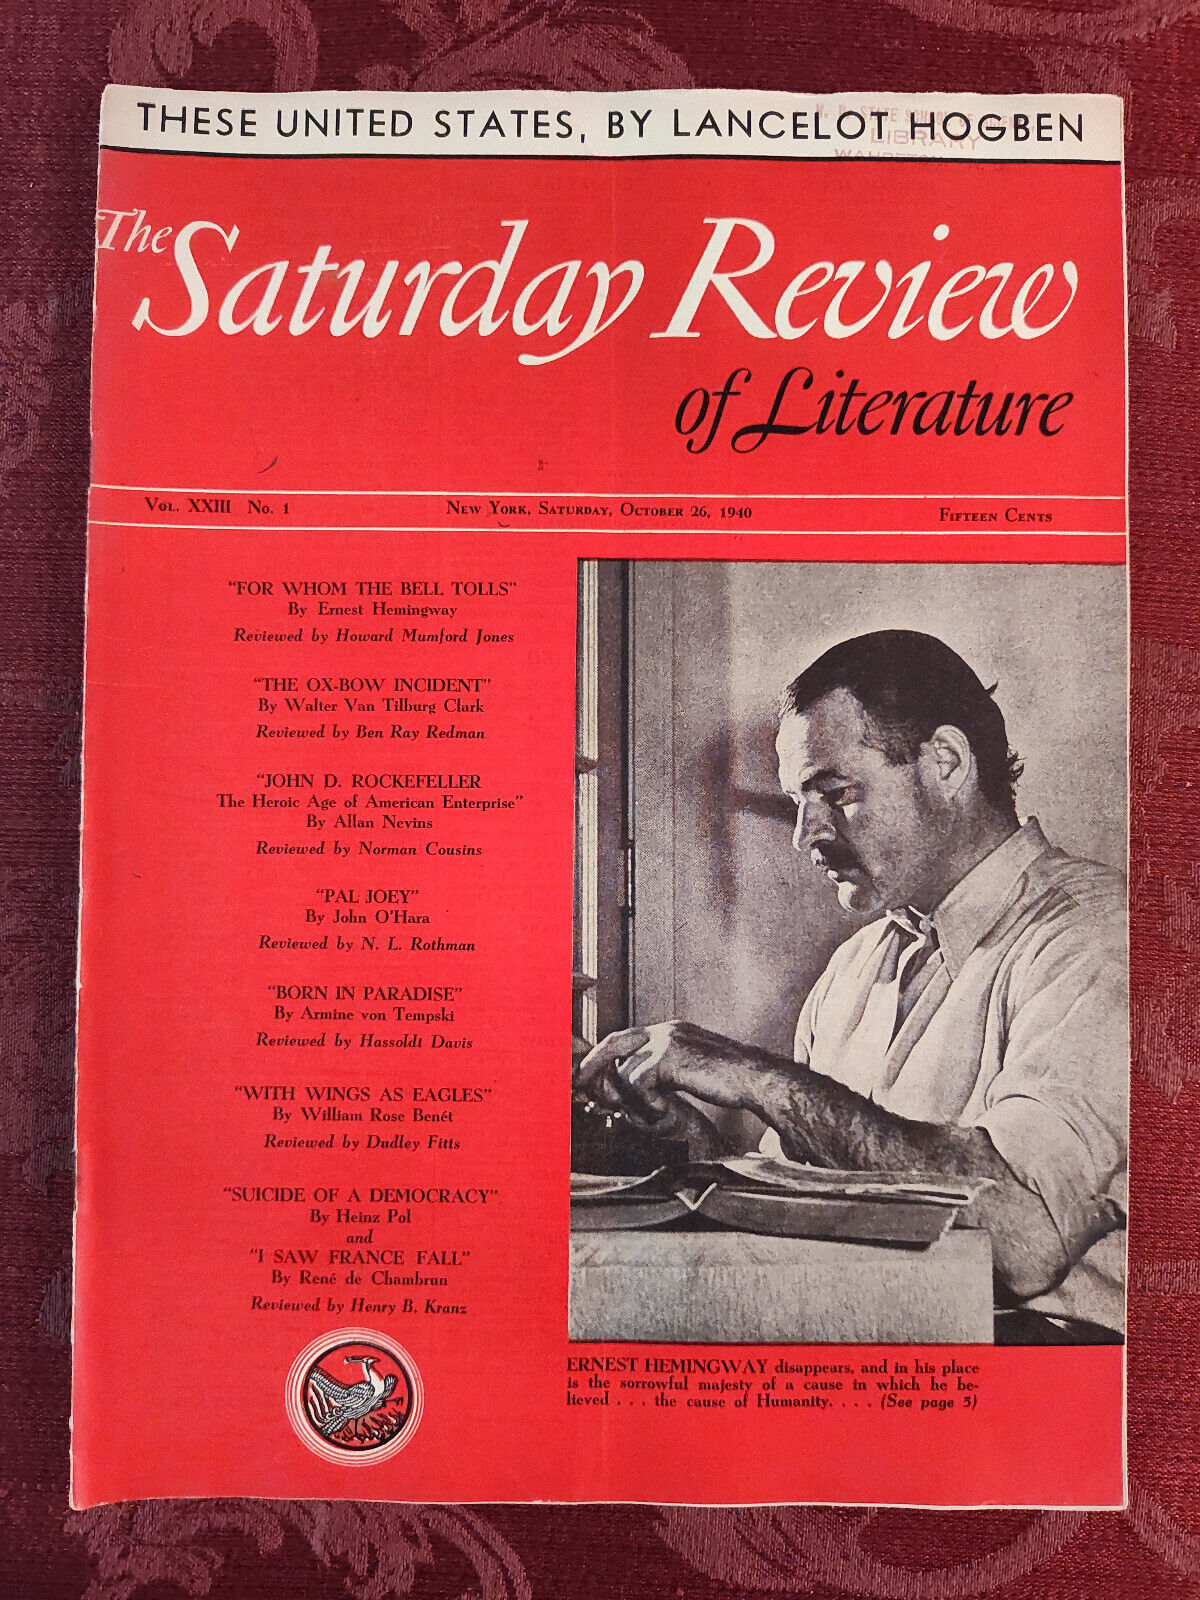 RARE SATURDAY REVIEW October 26 1940 Ernest Hemingway For Whom The Bell Tolls